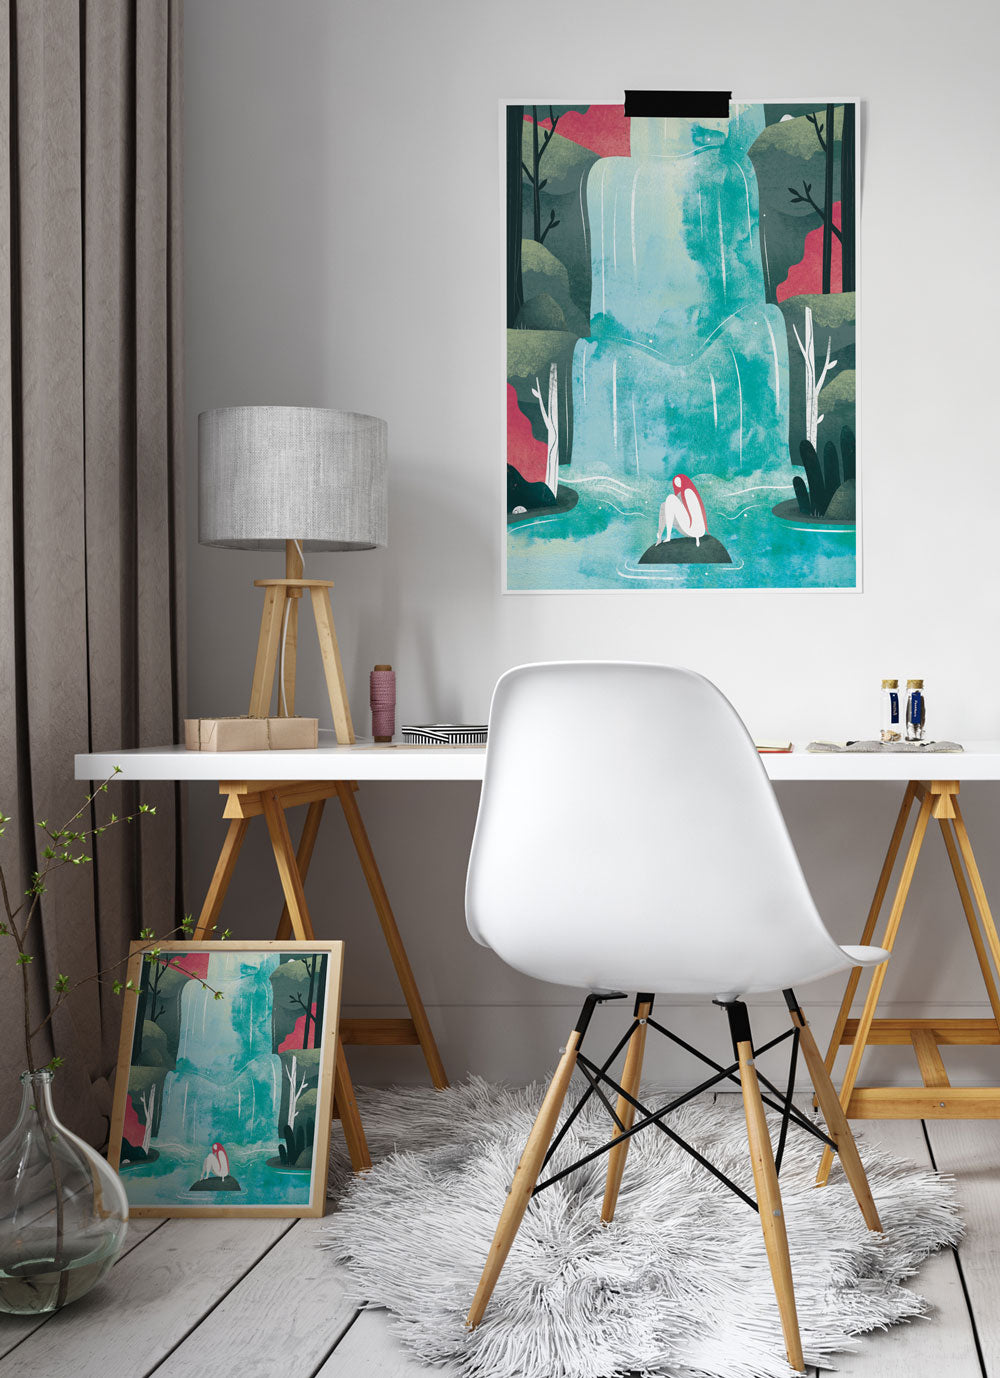 Waterfall Fantasy Print behind a desk in a beautiful room